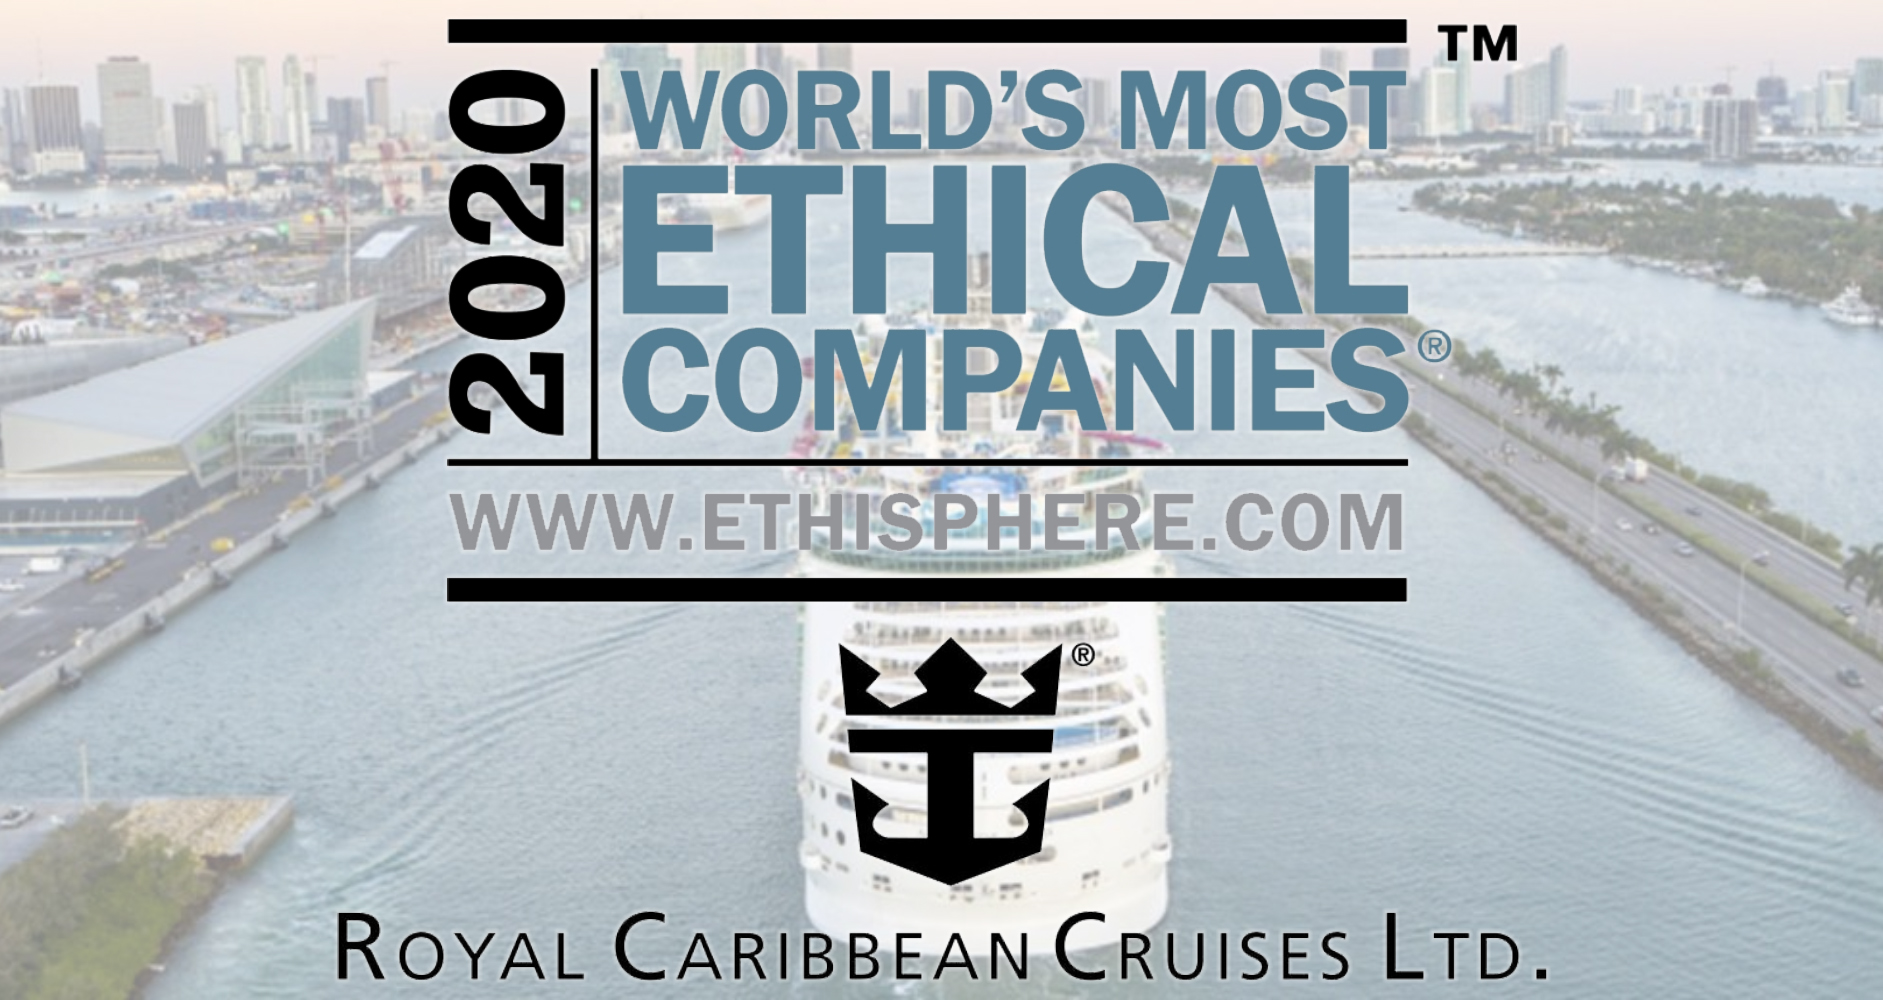 Royal Caribbean Cruises Named One Of World’s Most Ethical Companies For 5th Time